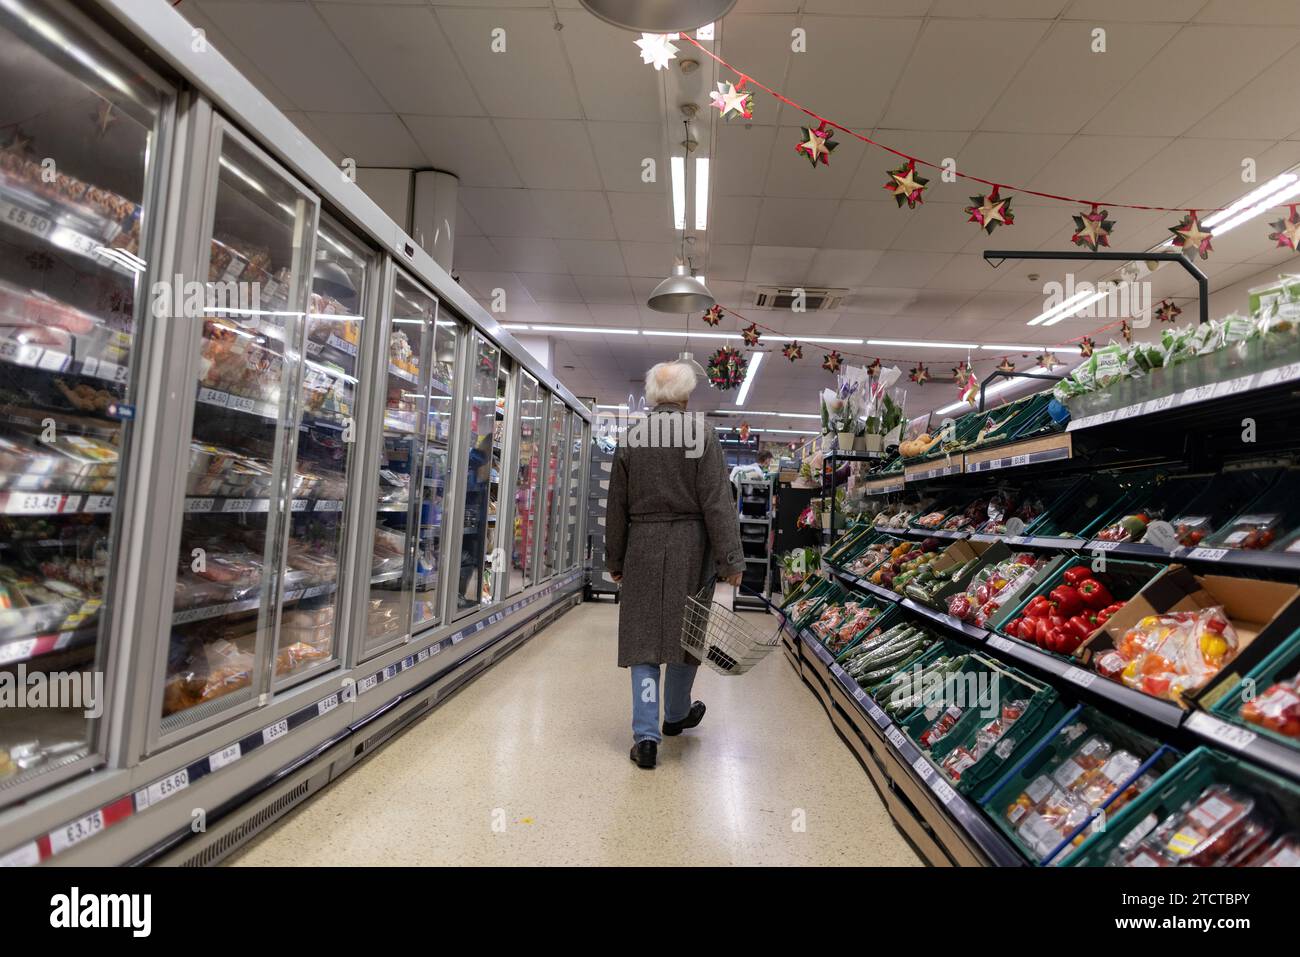 A man holding a shopping basket strolls down the vegetable and frozen food aisle of a TESCO supermarket in central London, UK Stock Photo